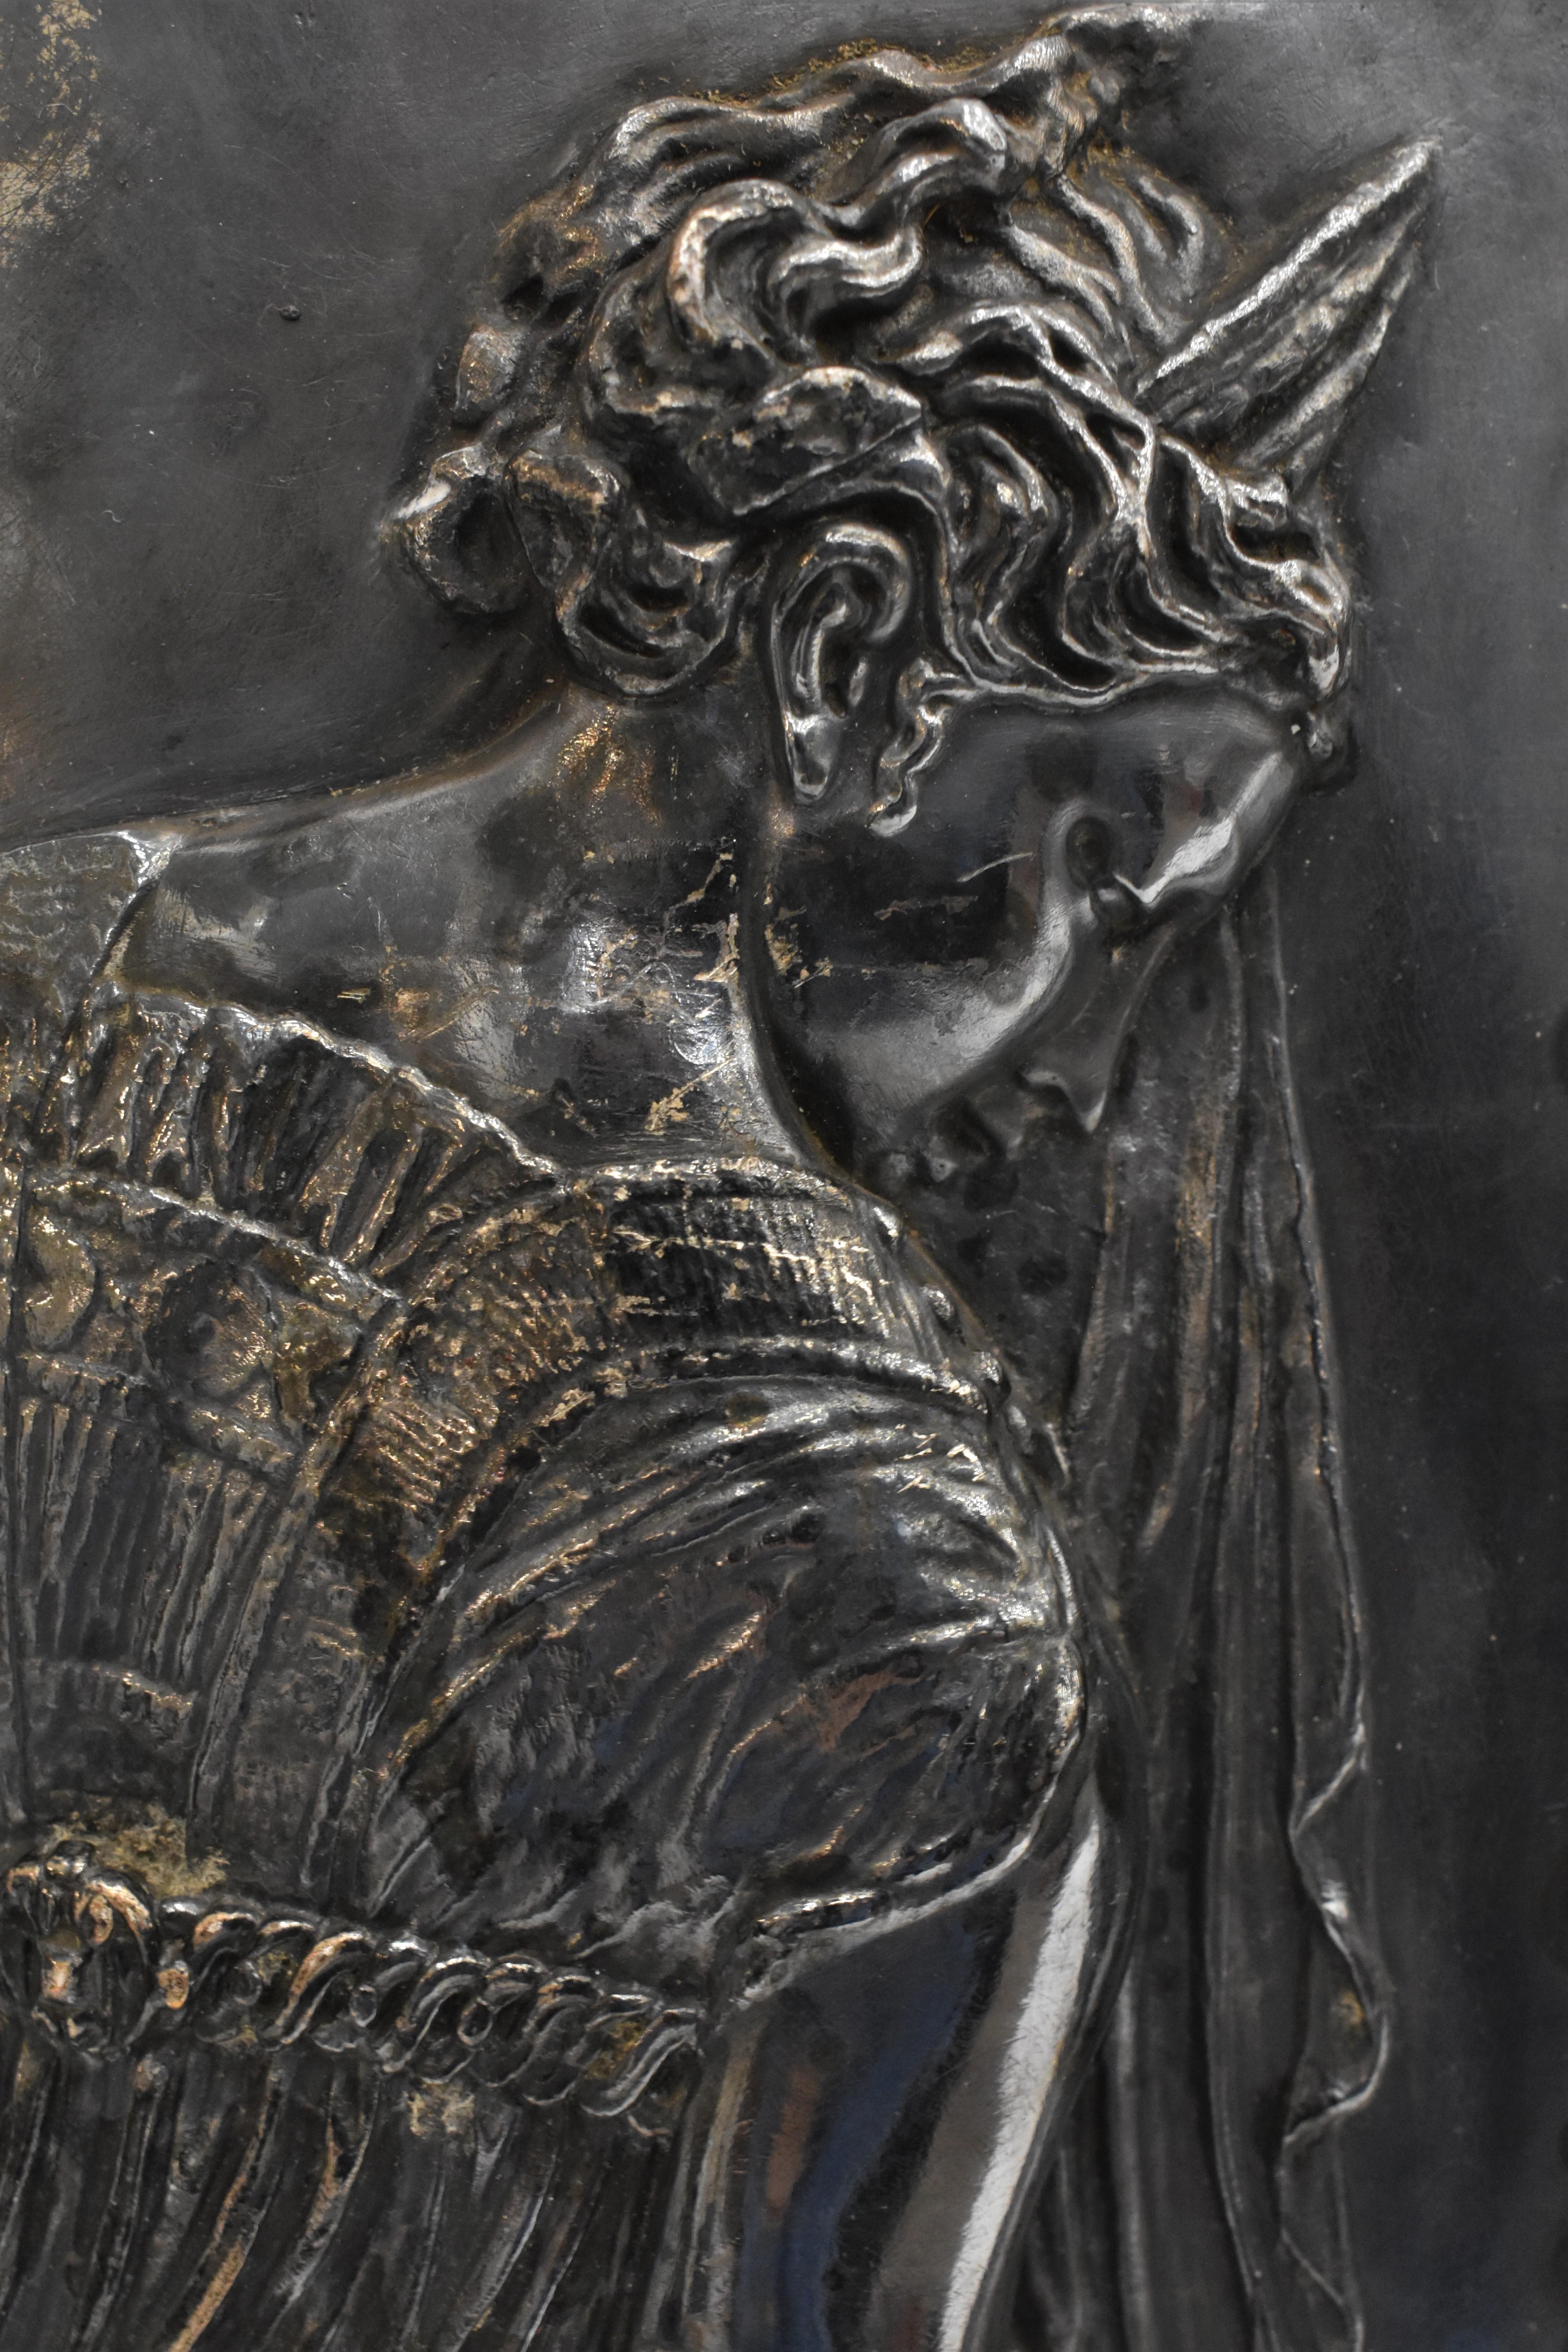 The piece offered here consists of two bronze reliefs, part A and part B, made by F. Barbedienne, after Jean Goujon.

Ferdinand Barbedienne (6 August 1810 – 21 March 1892) was a French metalworker and manufacturer, who was well known as a bronze